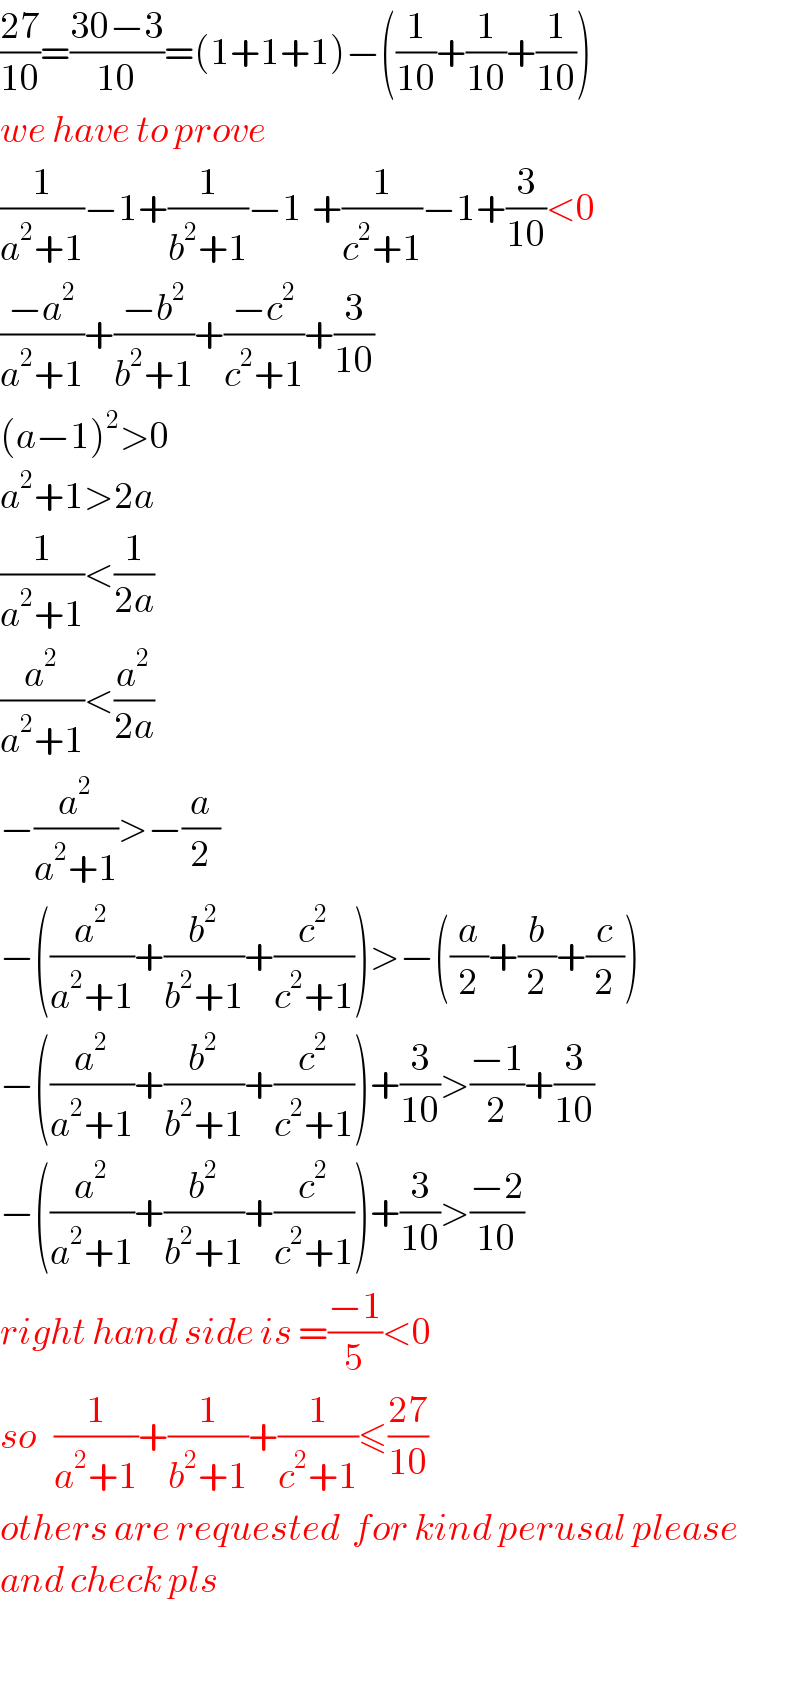 ((27)/(10))=((30−3)/(10))=(1+1+1)−((1/(10))+(1/(10))+(1/(10)))  we have to prove  (1/(a^2 +1))−1+(1/(b^2 +1))−1_ +(1/(c^2 +1))−1+(3/(10))<0  ((−a^2 )/(a^2 +1))+((−b^2 )/(b^2 +1))+((−c^2 )/(c^2 +1))+(3/(10))  (a−1)^2 >0  a^2 +1>2a  (1/(a^2 +1))<(1/(2a))  (a^2 /(a^2 +1))<(a^2 /(2a))  −(a^2 /(a^2 +1))>−(a/2)  −((a^2 /(a^2 +1))+(b^2 /(b^2 +1))+(c^2 /(c^2 +1)))>−((a/2)+(b/2)+(c/2))  −((a^2 /(a^2 +1))+(b^2 /(b^2 +1))+(c^2 /(c^2 +1)))+(3/(10))>((−1)/2)+(3/(10))  −((a^2 /(a^2 +1))+(b^2 /(b^2 +1))+(c^2 /(c^2 +1)))+(3/(10))>((−2)/(10))  right hand side is =((−1)/5)<0  so   (1/(a^2 +1))+(1/(b^2 +1))+(1/(c^2 +1))≤((27)/(10))  others are requested  for kind perusal please  and check pls    